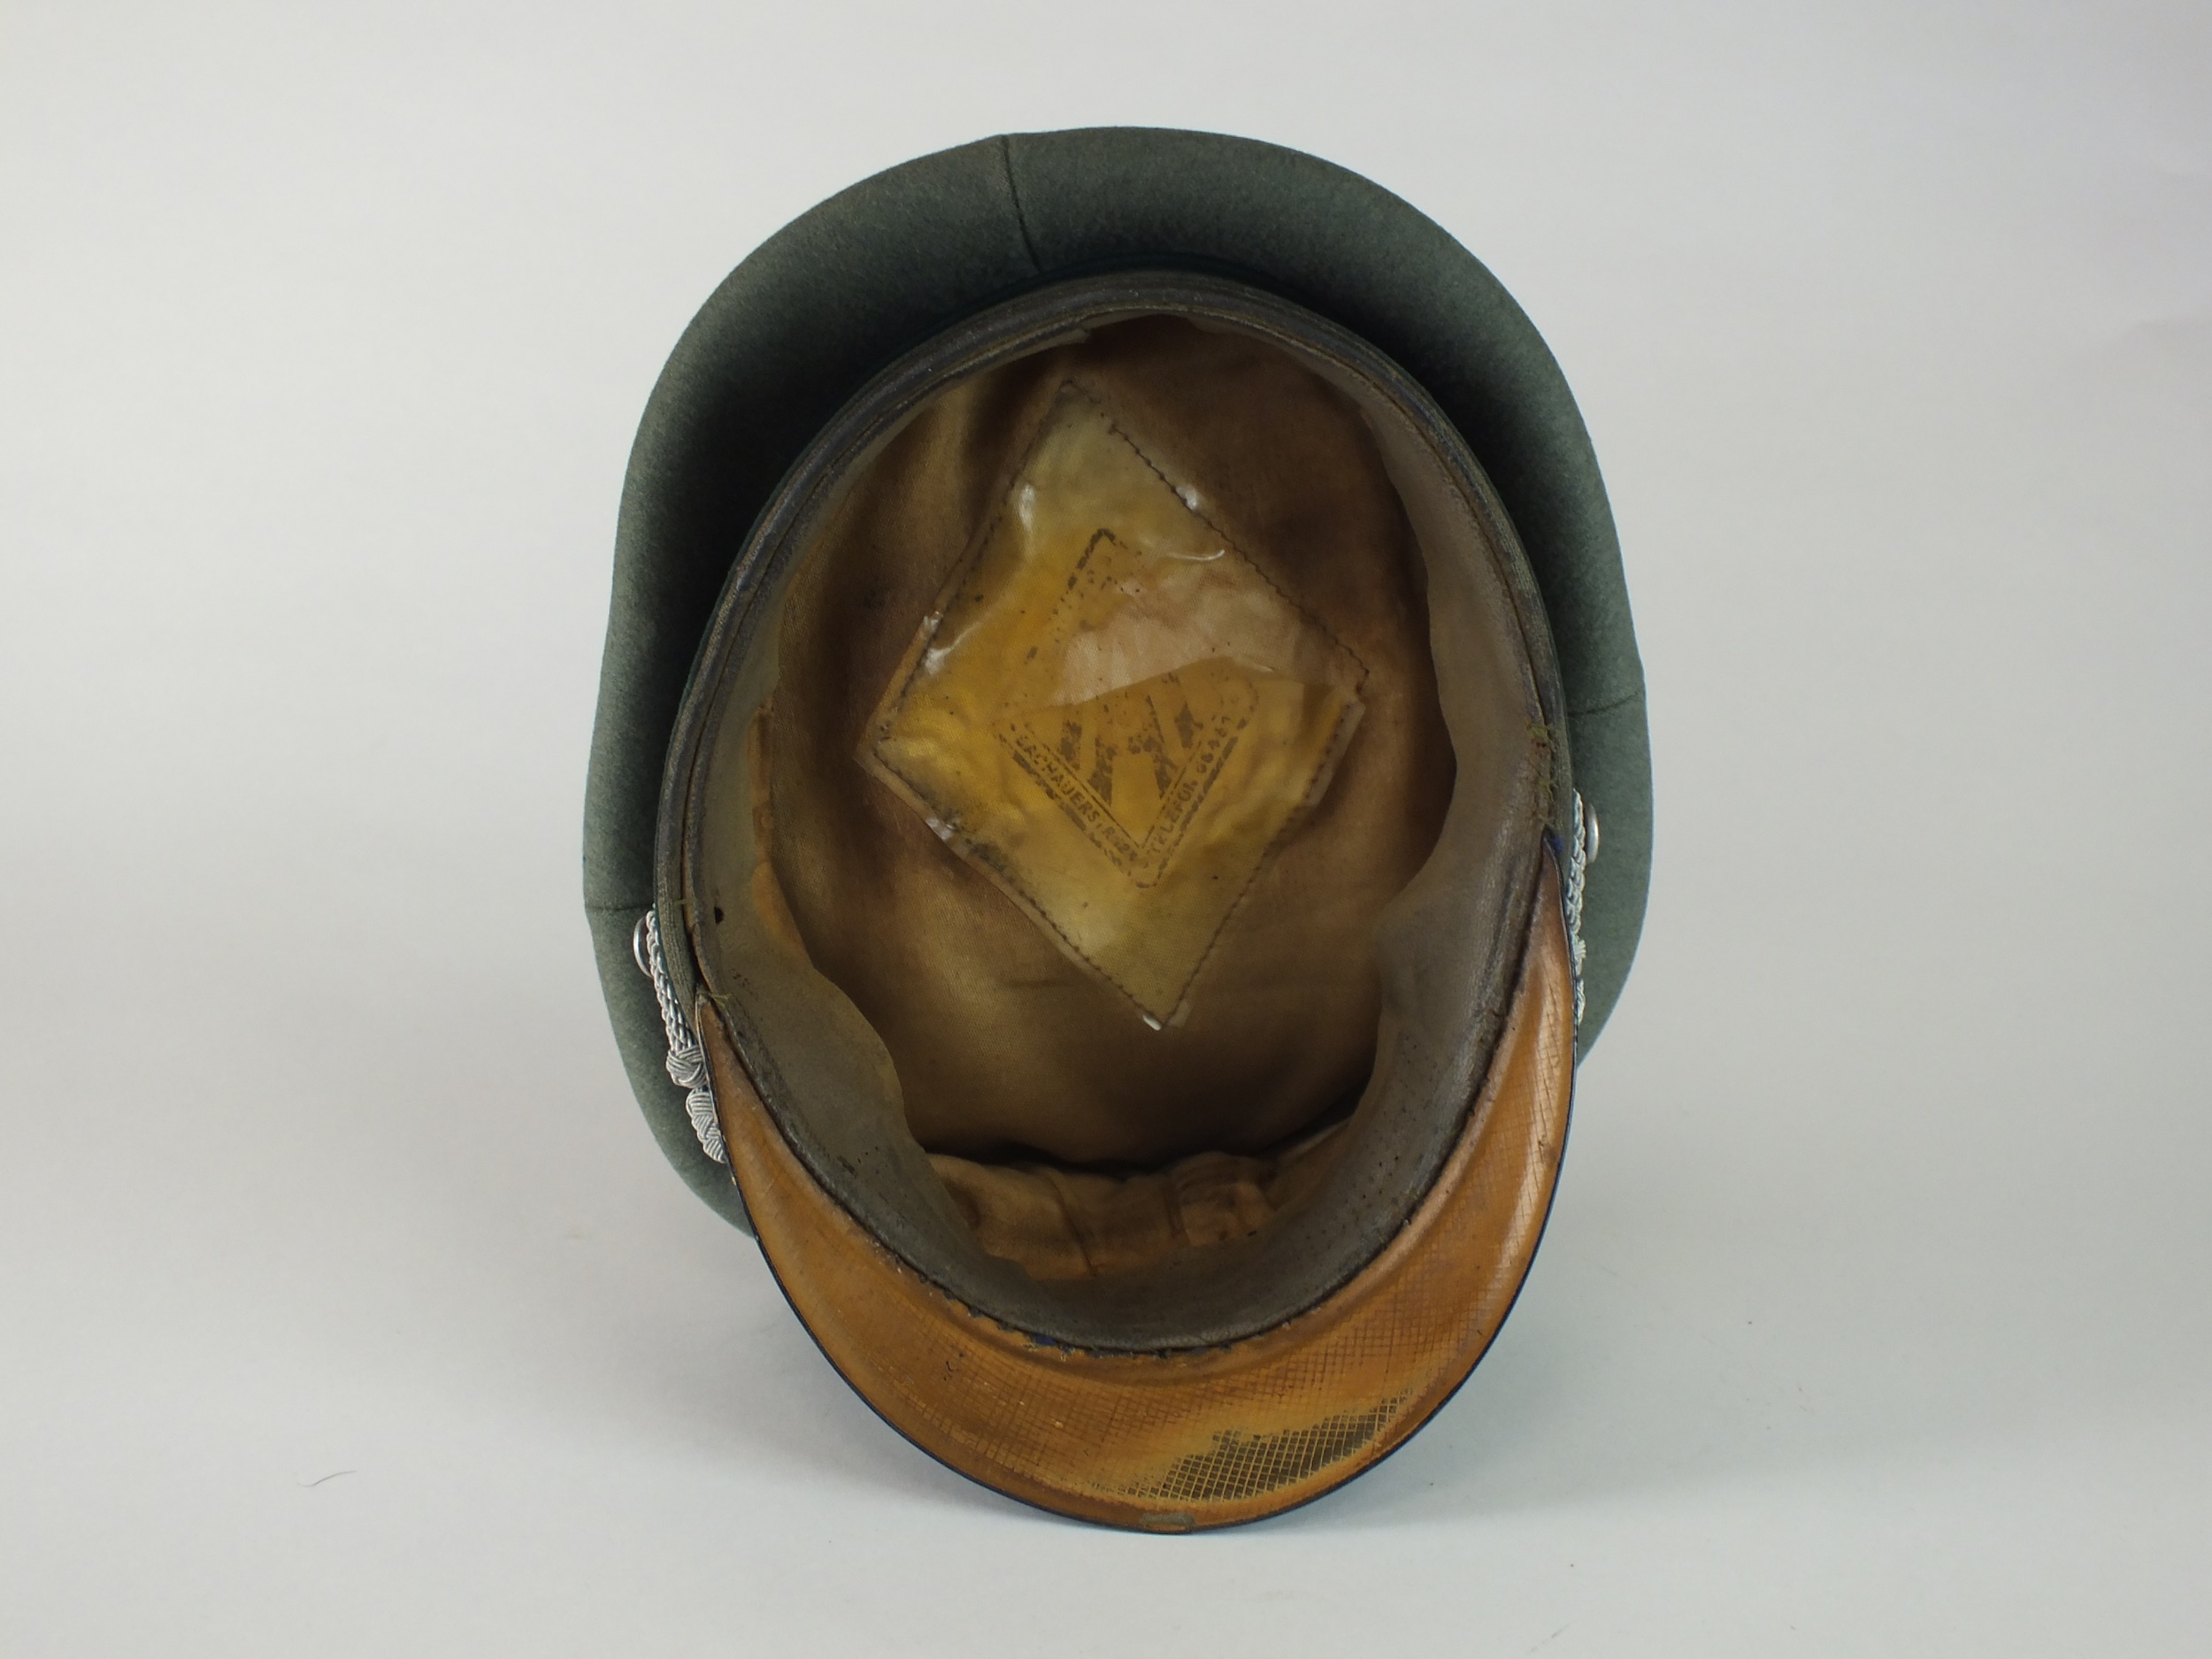 German Third Reich Army Administration Officer's visor cap - Image 5 of 7